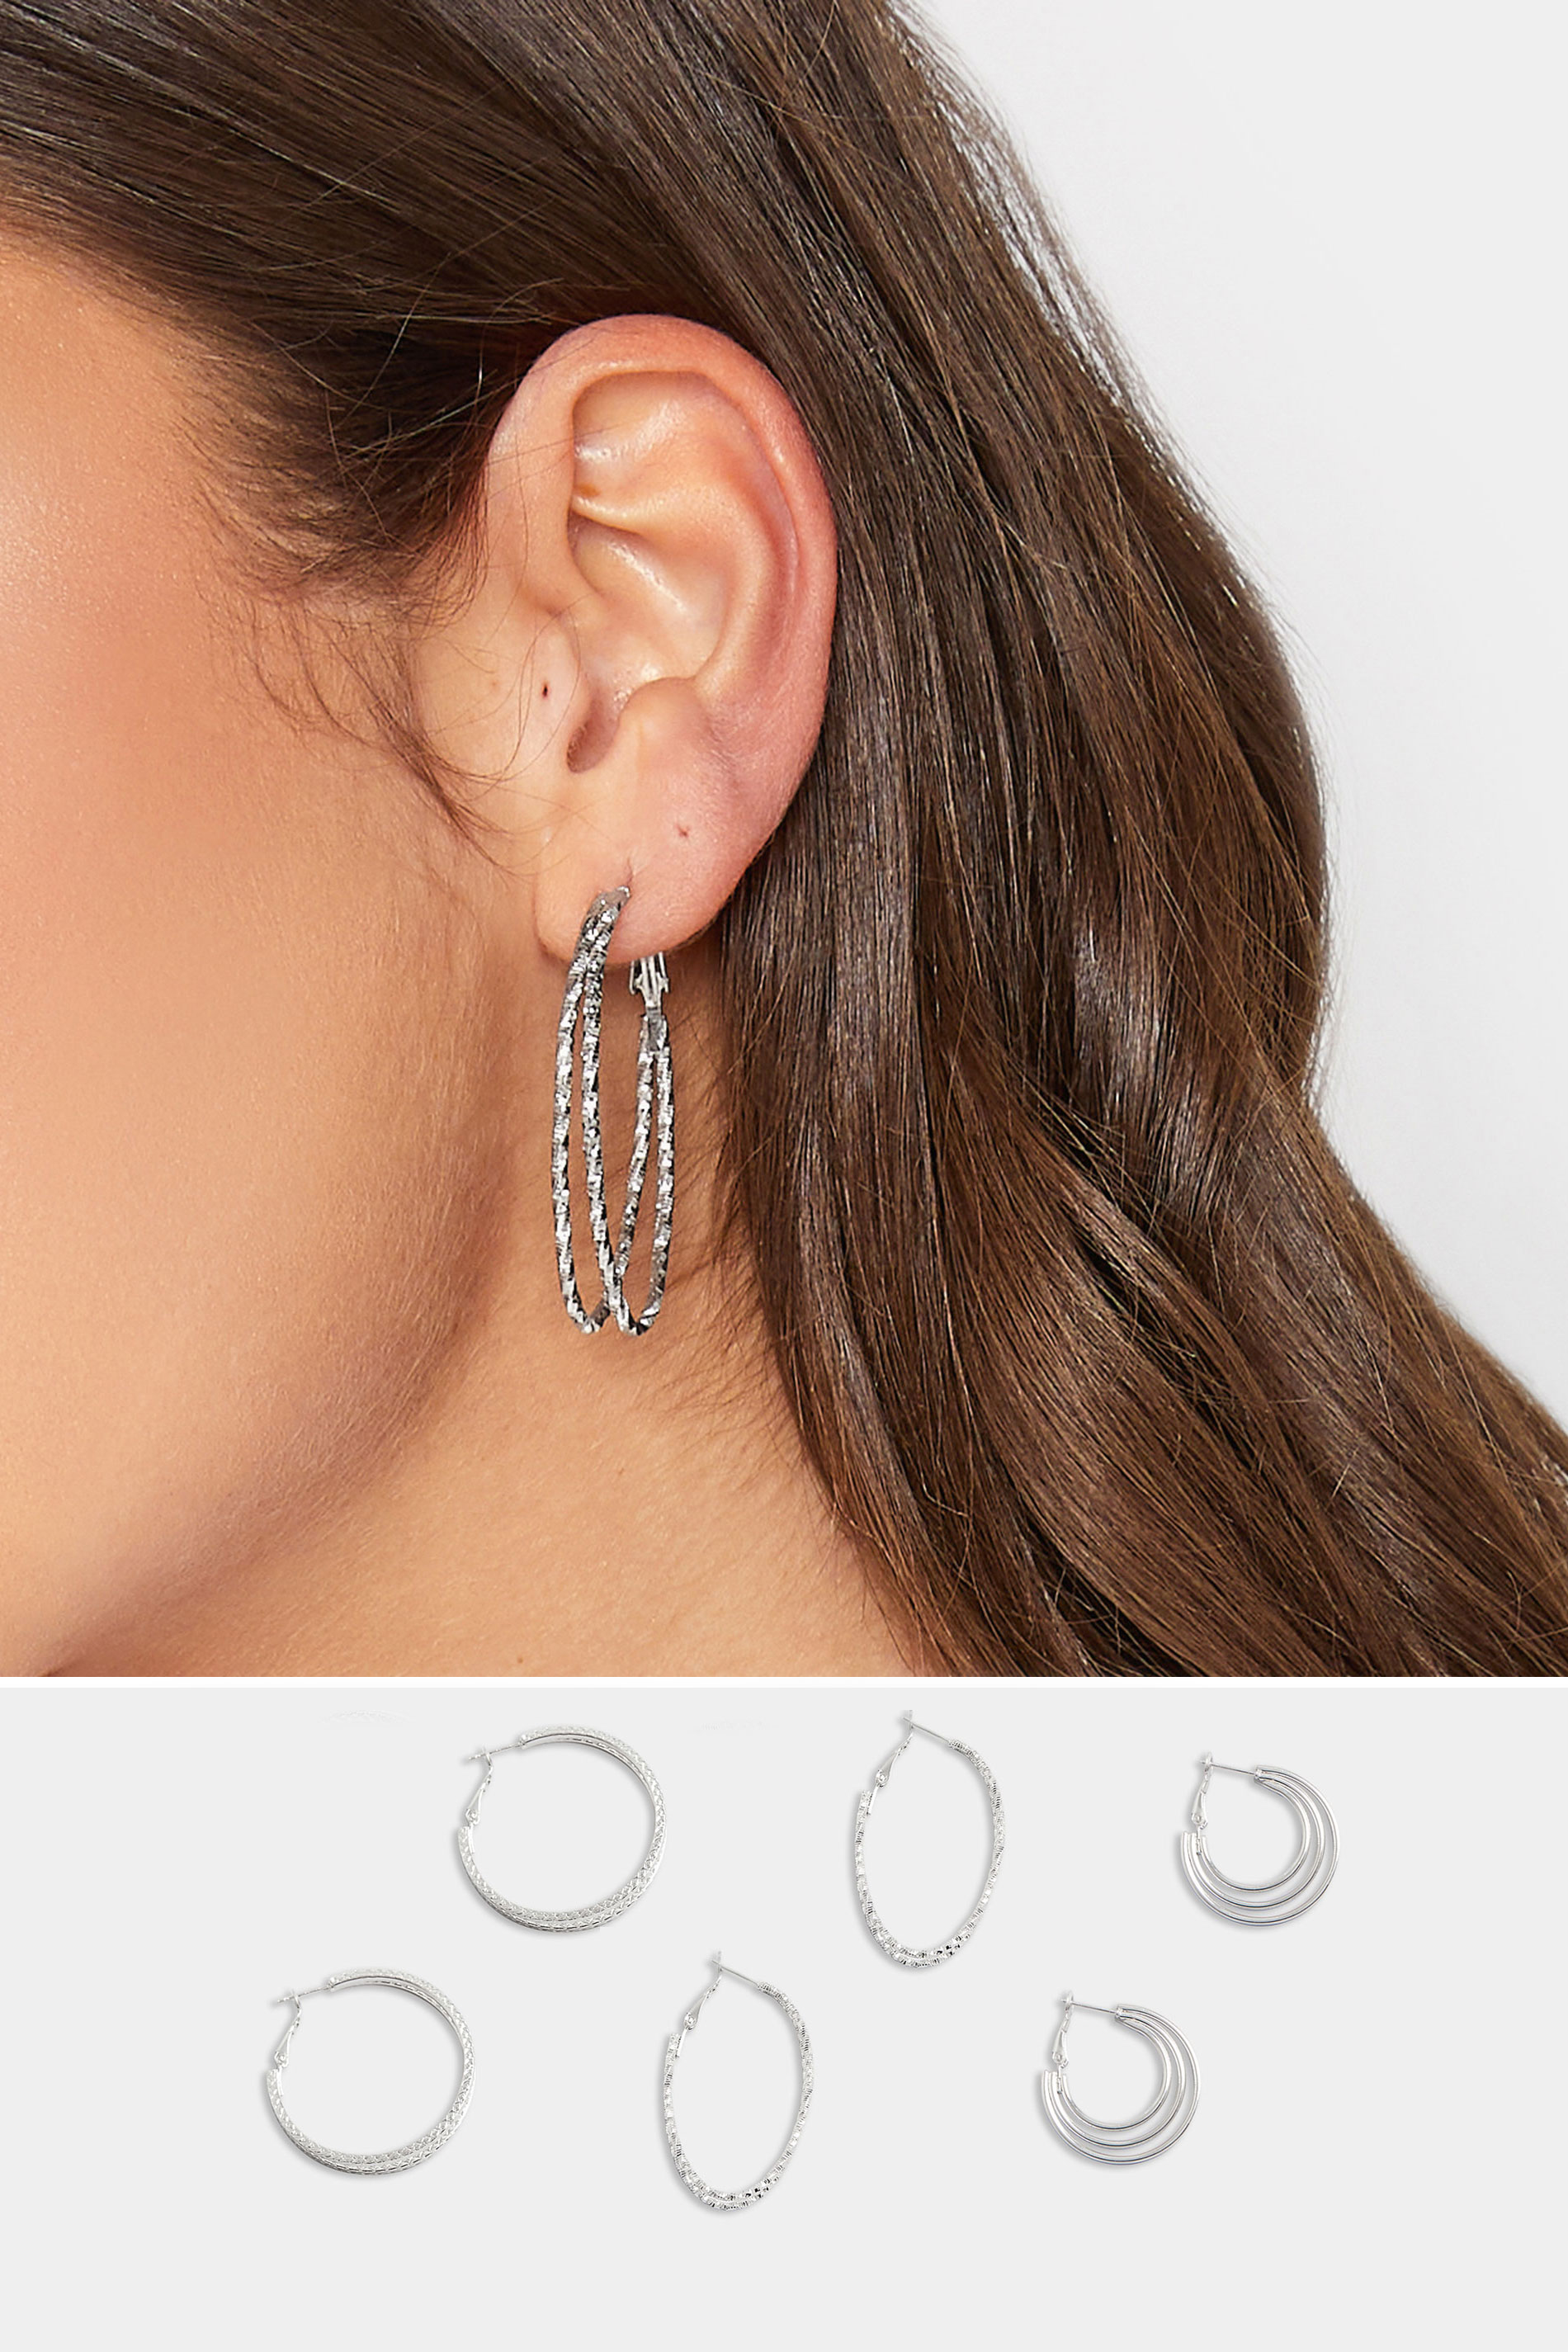 3 PACK Silver Tone Textured Hoop Earring Set | Yours Clothing 1